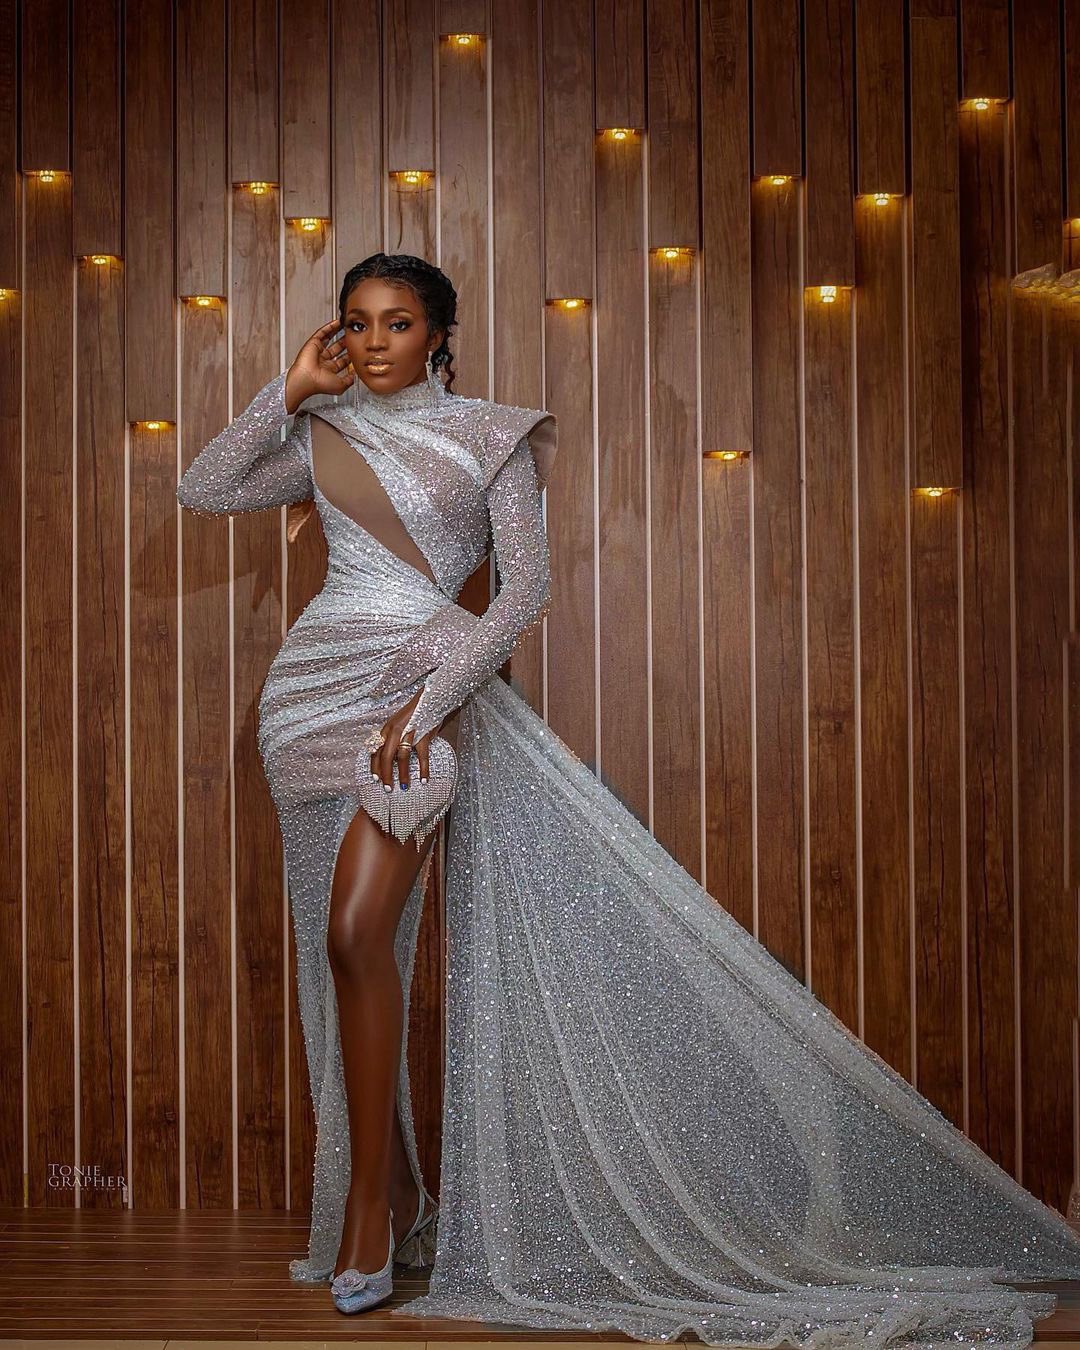 These are the best Africa Magic Viewers’ Choice Awards looks worn by Nollywood celebrities. The Africa Magic Viewers’ Choice Awards 2022, here are the best dresses. Best Africa Magic Viewers’ Choice Awards 2022 Africa Magic Viewers’ Choice Awards 2022 outfits full list, worst Africa Magic Viewers’ Choice Awards 2022, Africa Magic Viewers’ Choice Awards 2022 red carpet. amvca meaning, amvca 2022 nominations, amvca 2022 dates, amvca 2022 nominees list, amvca 2022 nominees and winners, amvca 2022 date and time, amvca best dressed 2022, amvca 2022 winners list, amvca 2022 best dressed male, amvca 2022 venue.